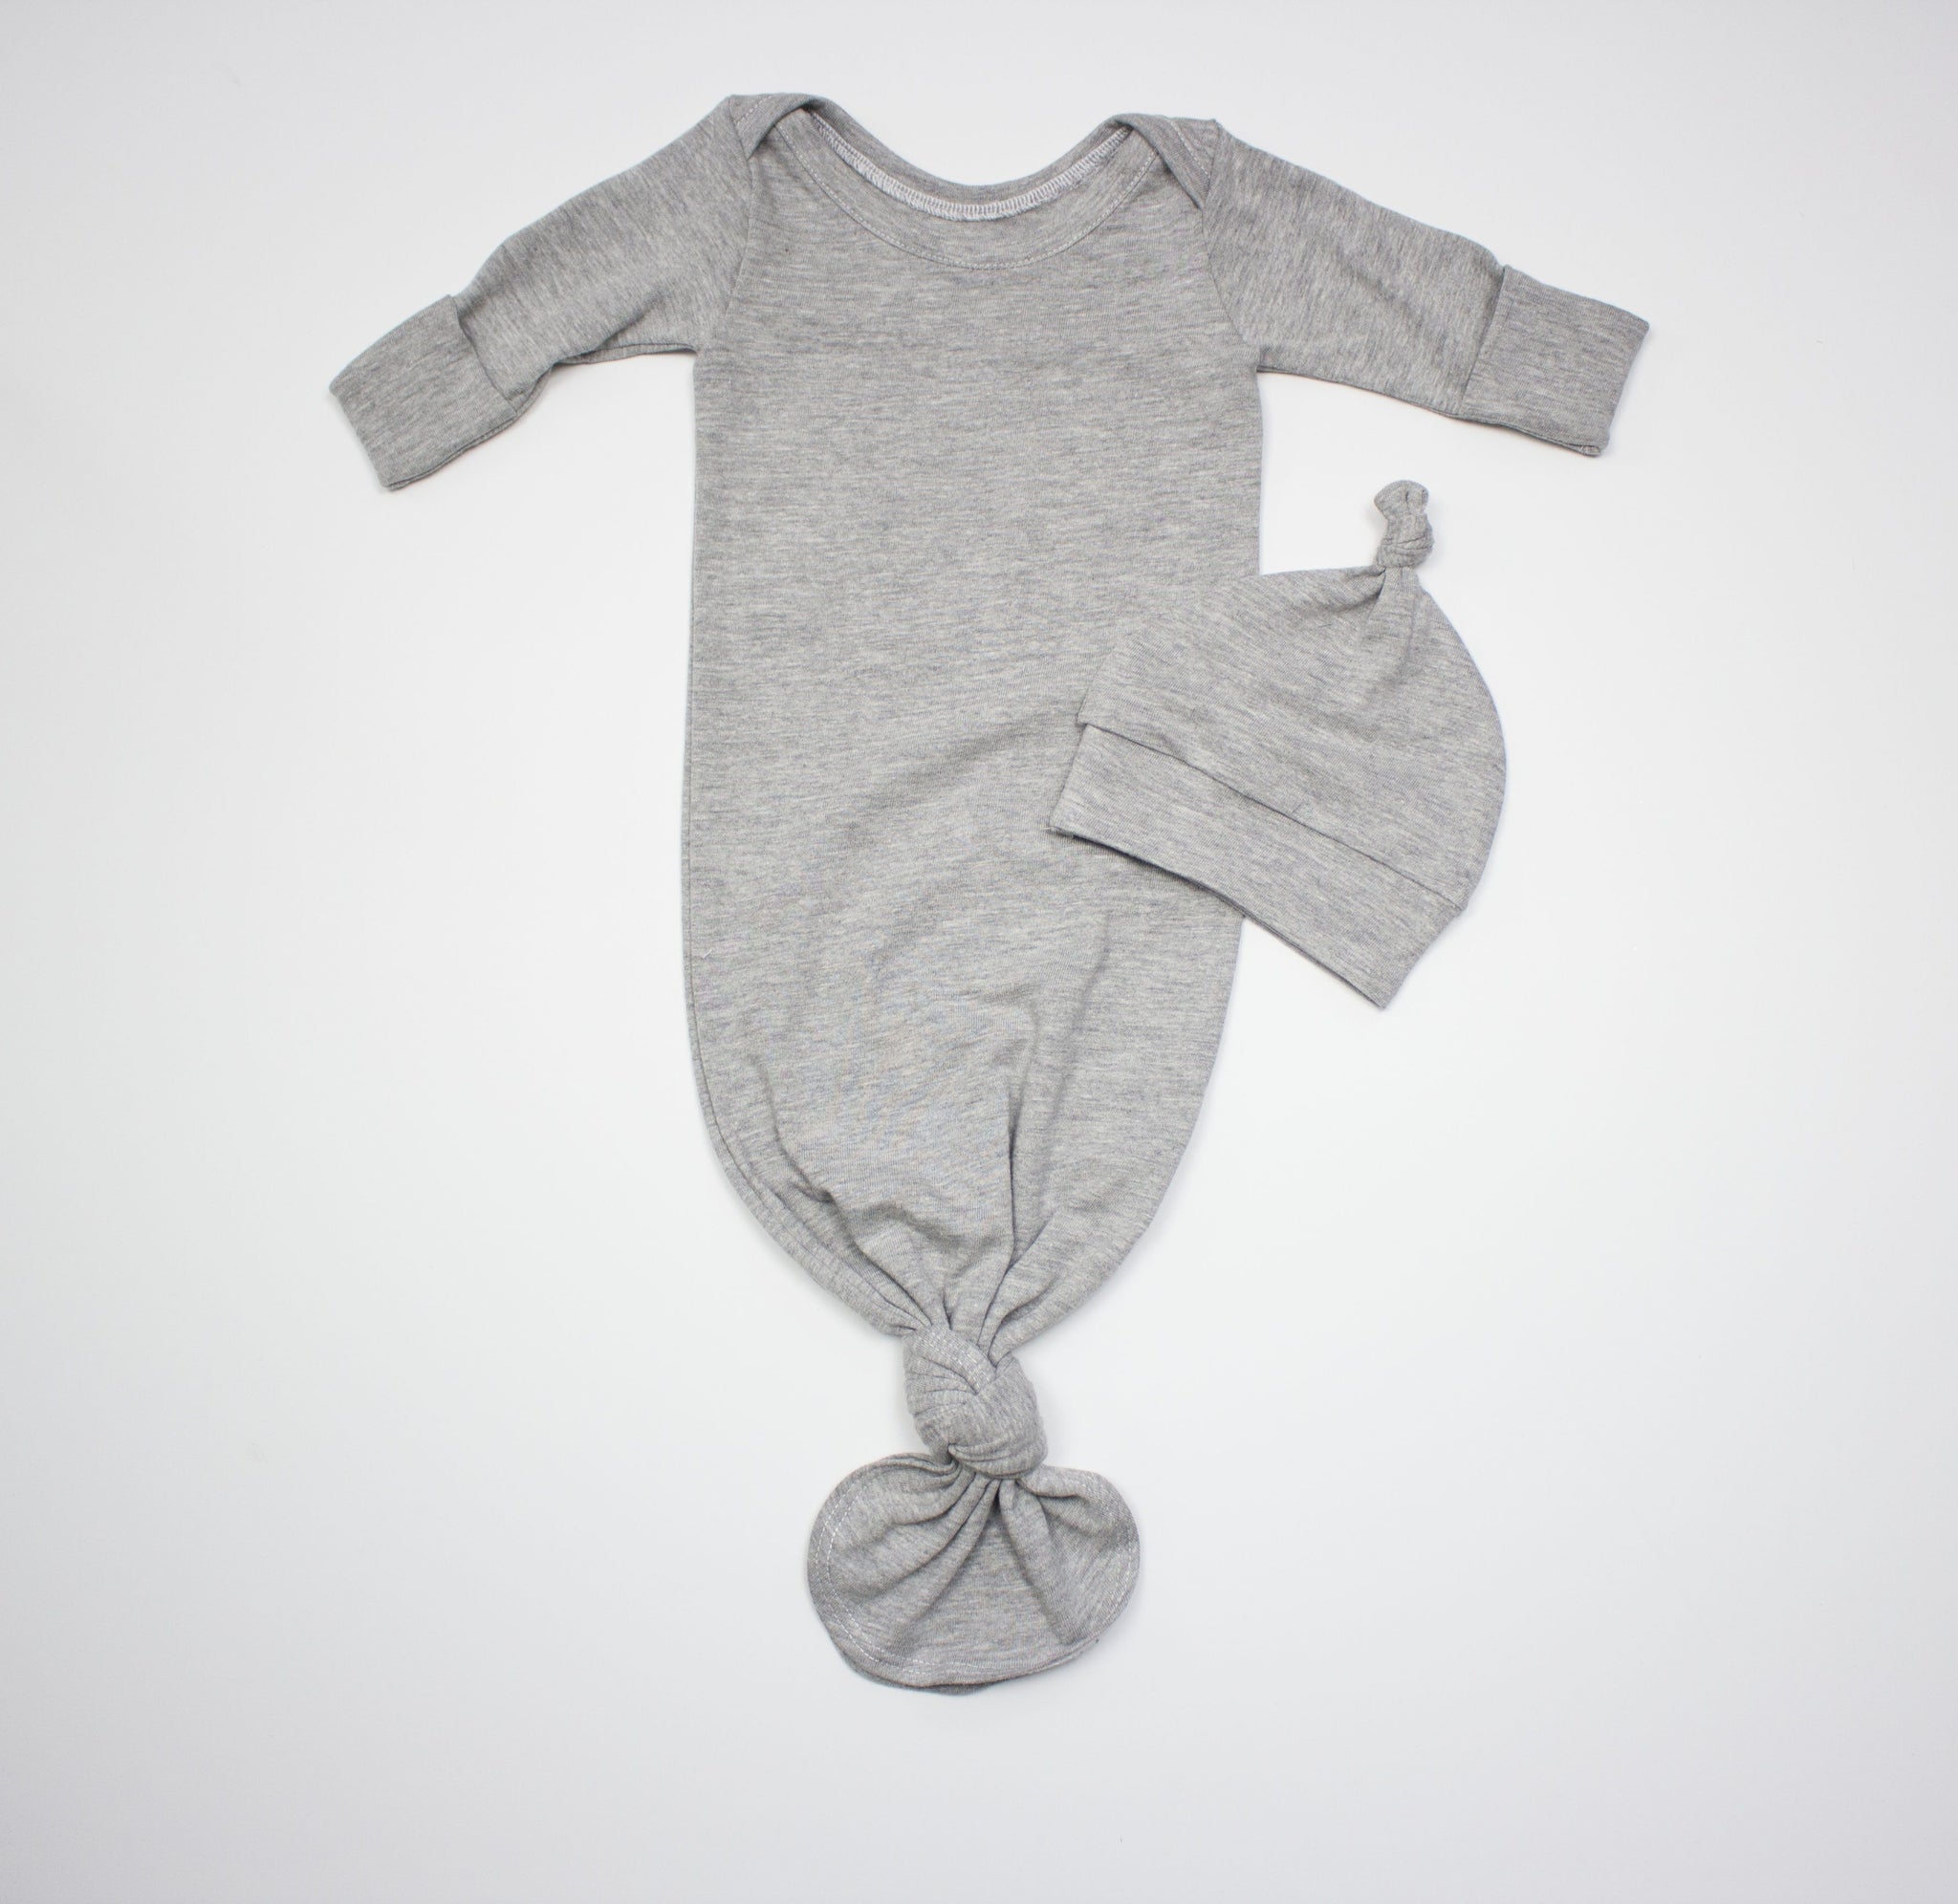 Baby Studio Grey Organic Cotton Swaddle Wrap 0-3 Months In Grey